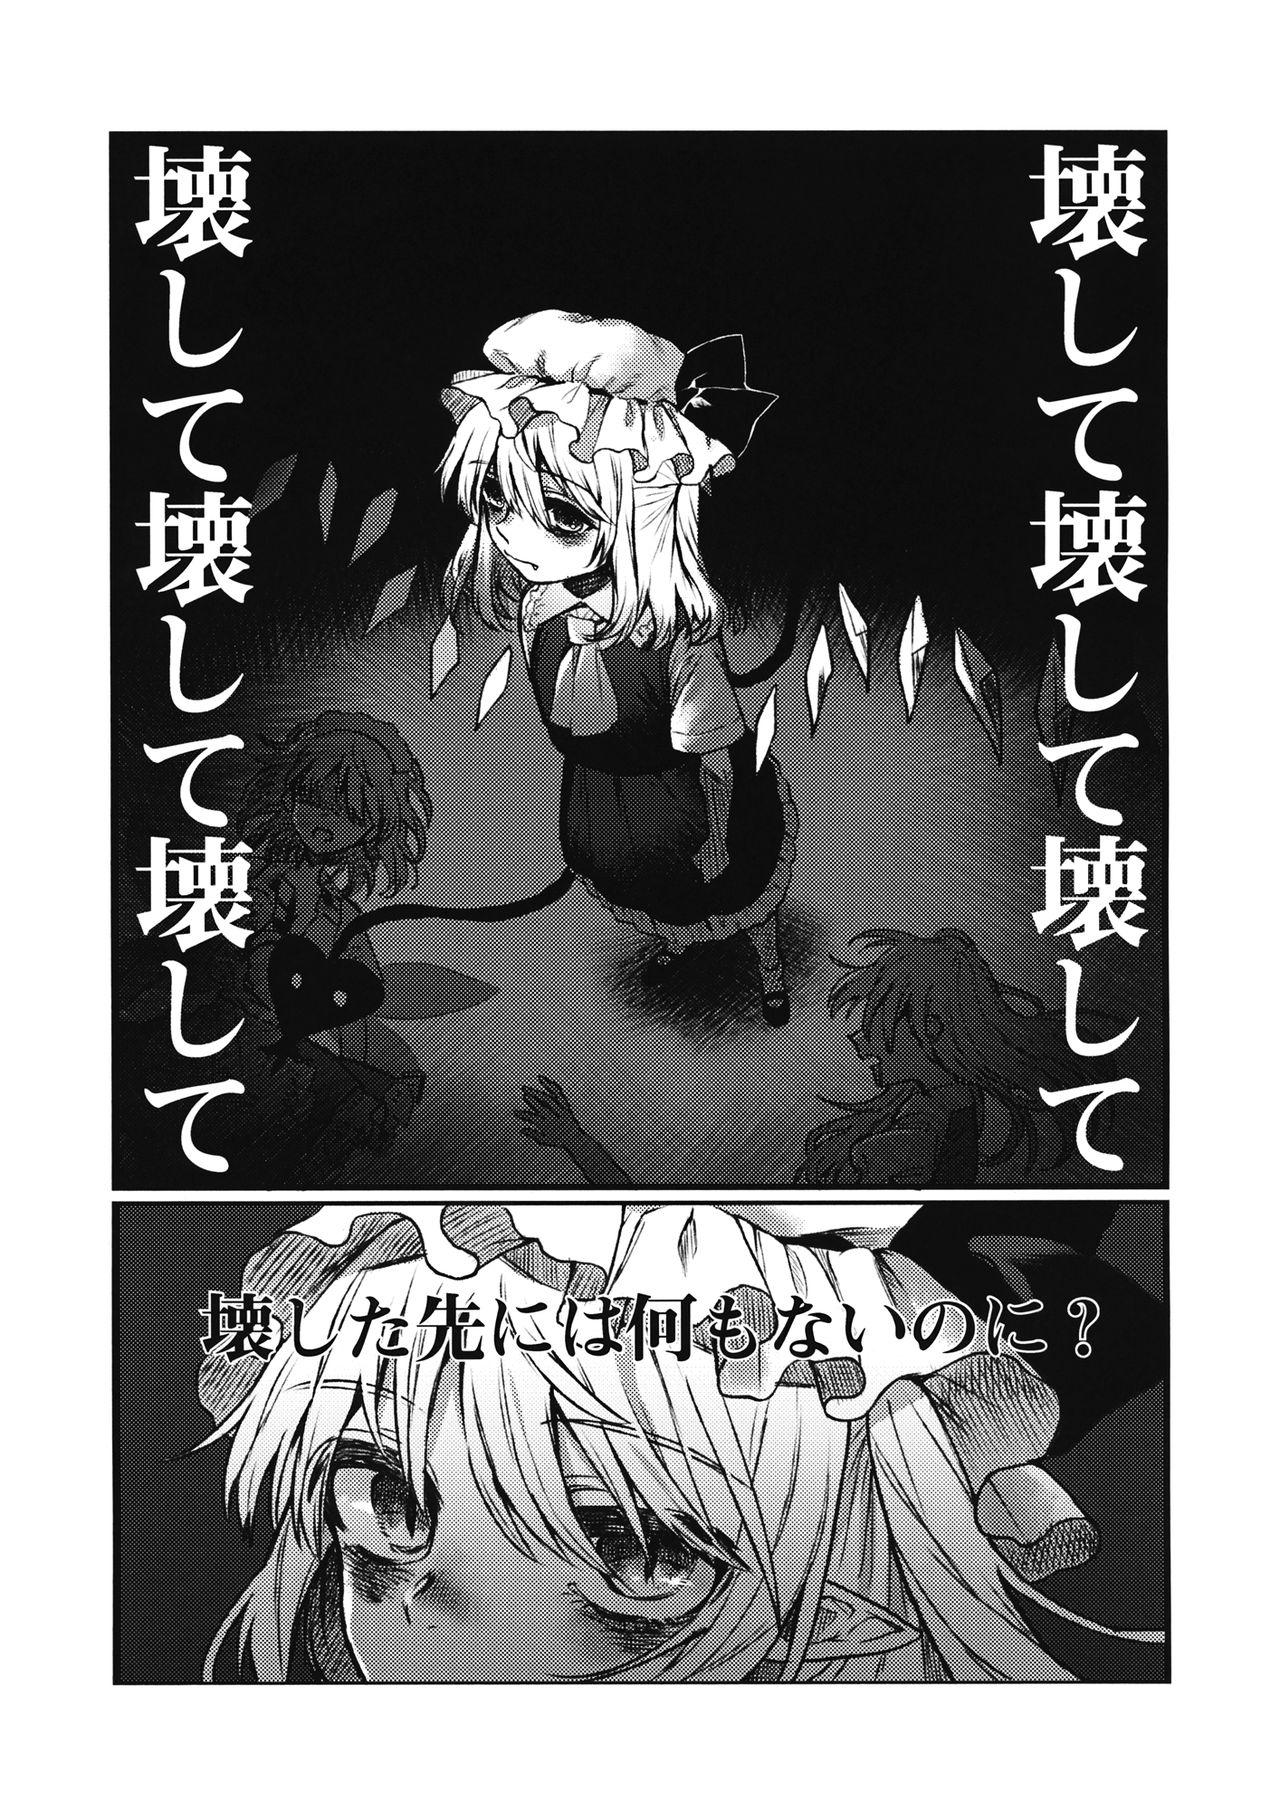 Private Sex Maid Flandre Kansatsu Nikki - Maid Flandre observation diary - Touhou project T Girl - Page 2